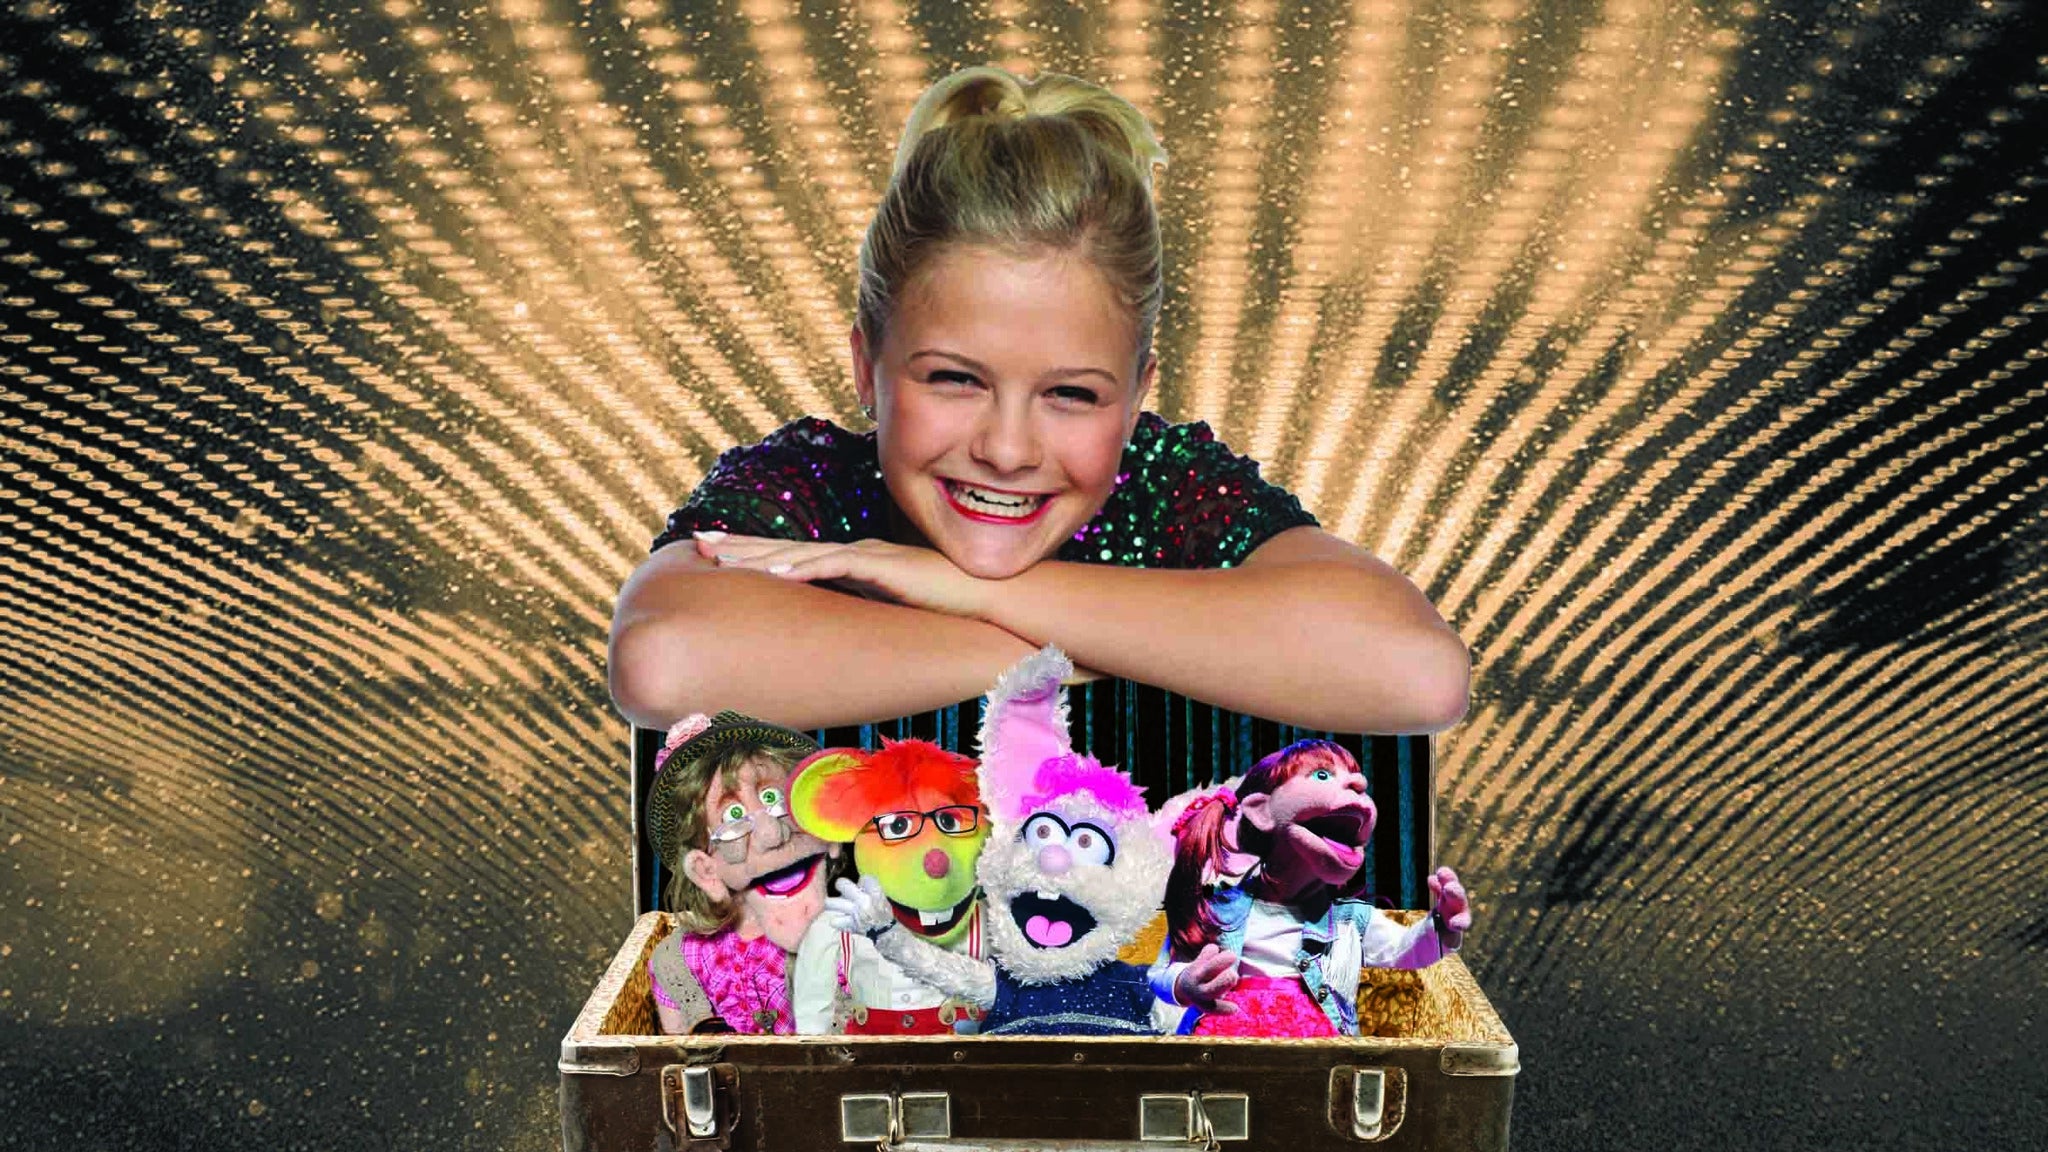 Darci Lynne: My Lips Are Sealed (Except When They're Not) in Jefferson City promo photo for Venue presale offer code